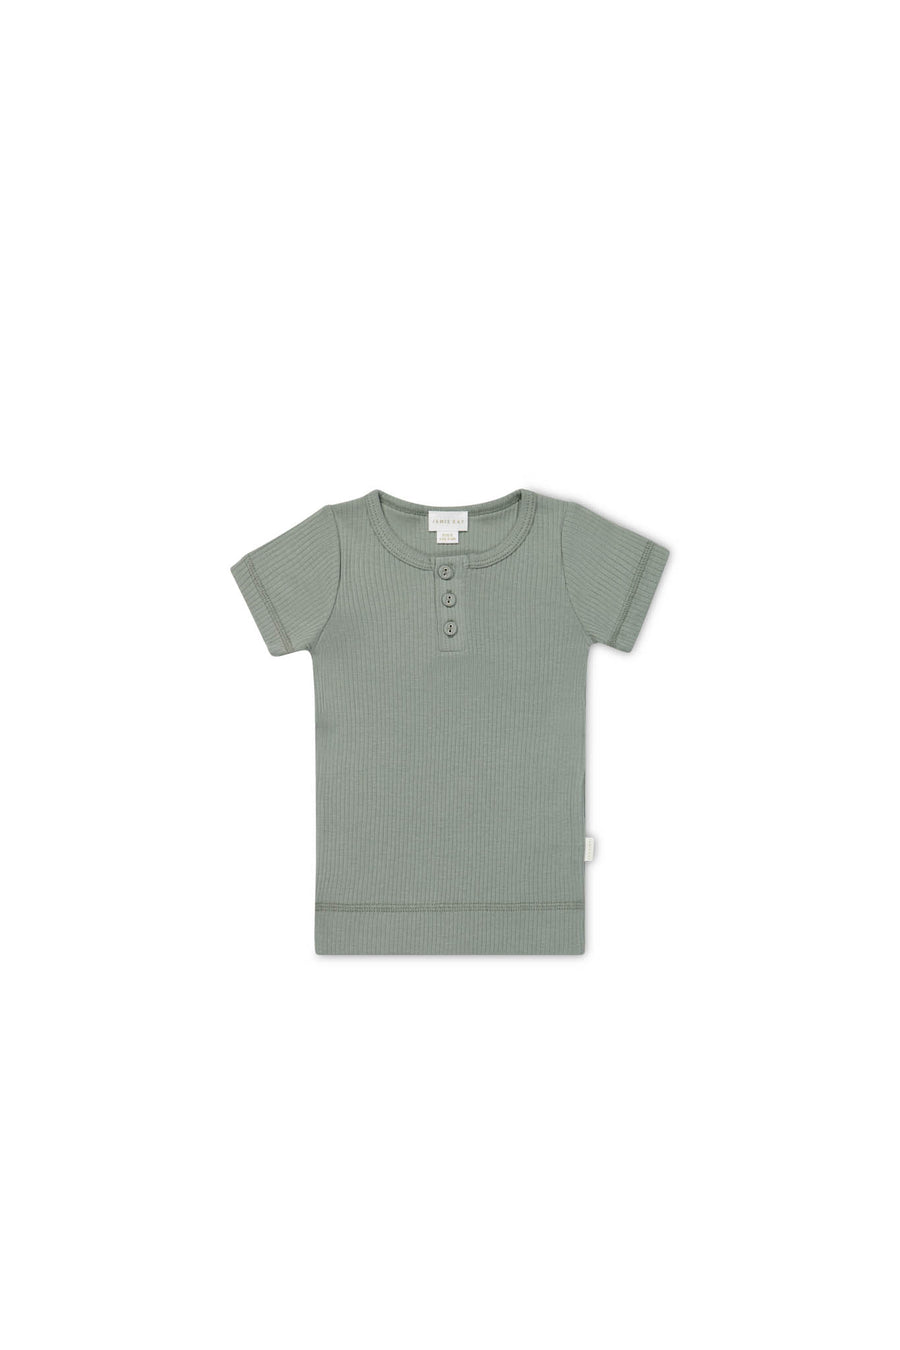 Organic Cotton Modal Henley Tee - Milford Sound Childrens Top from Jamie Kay NZ